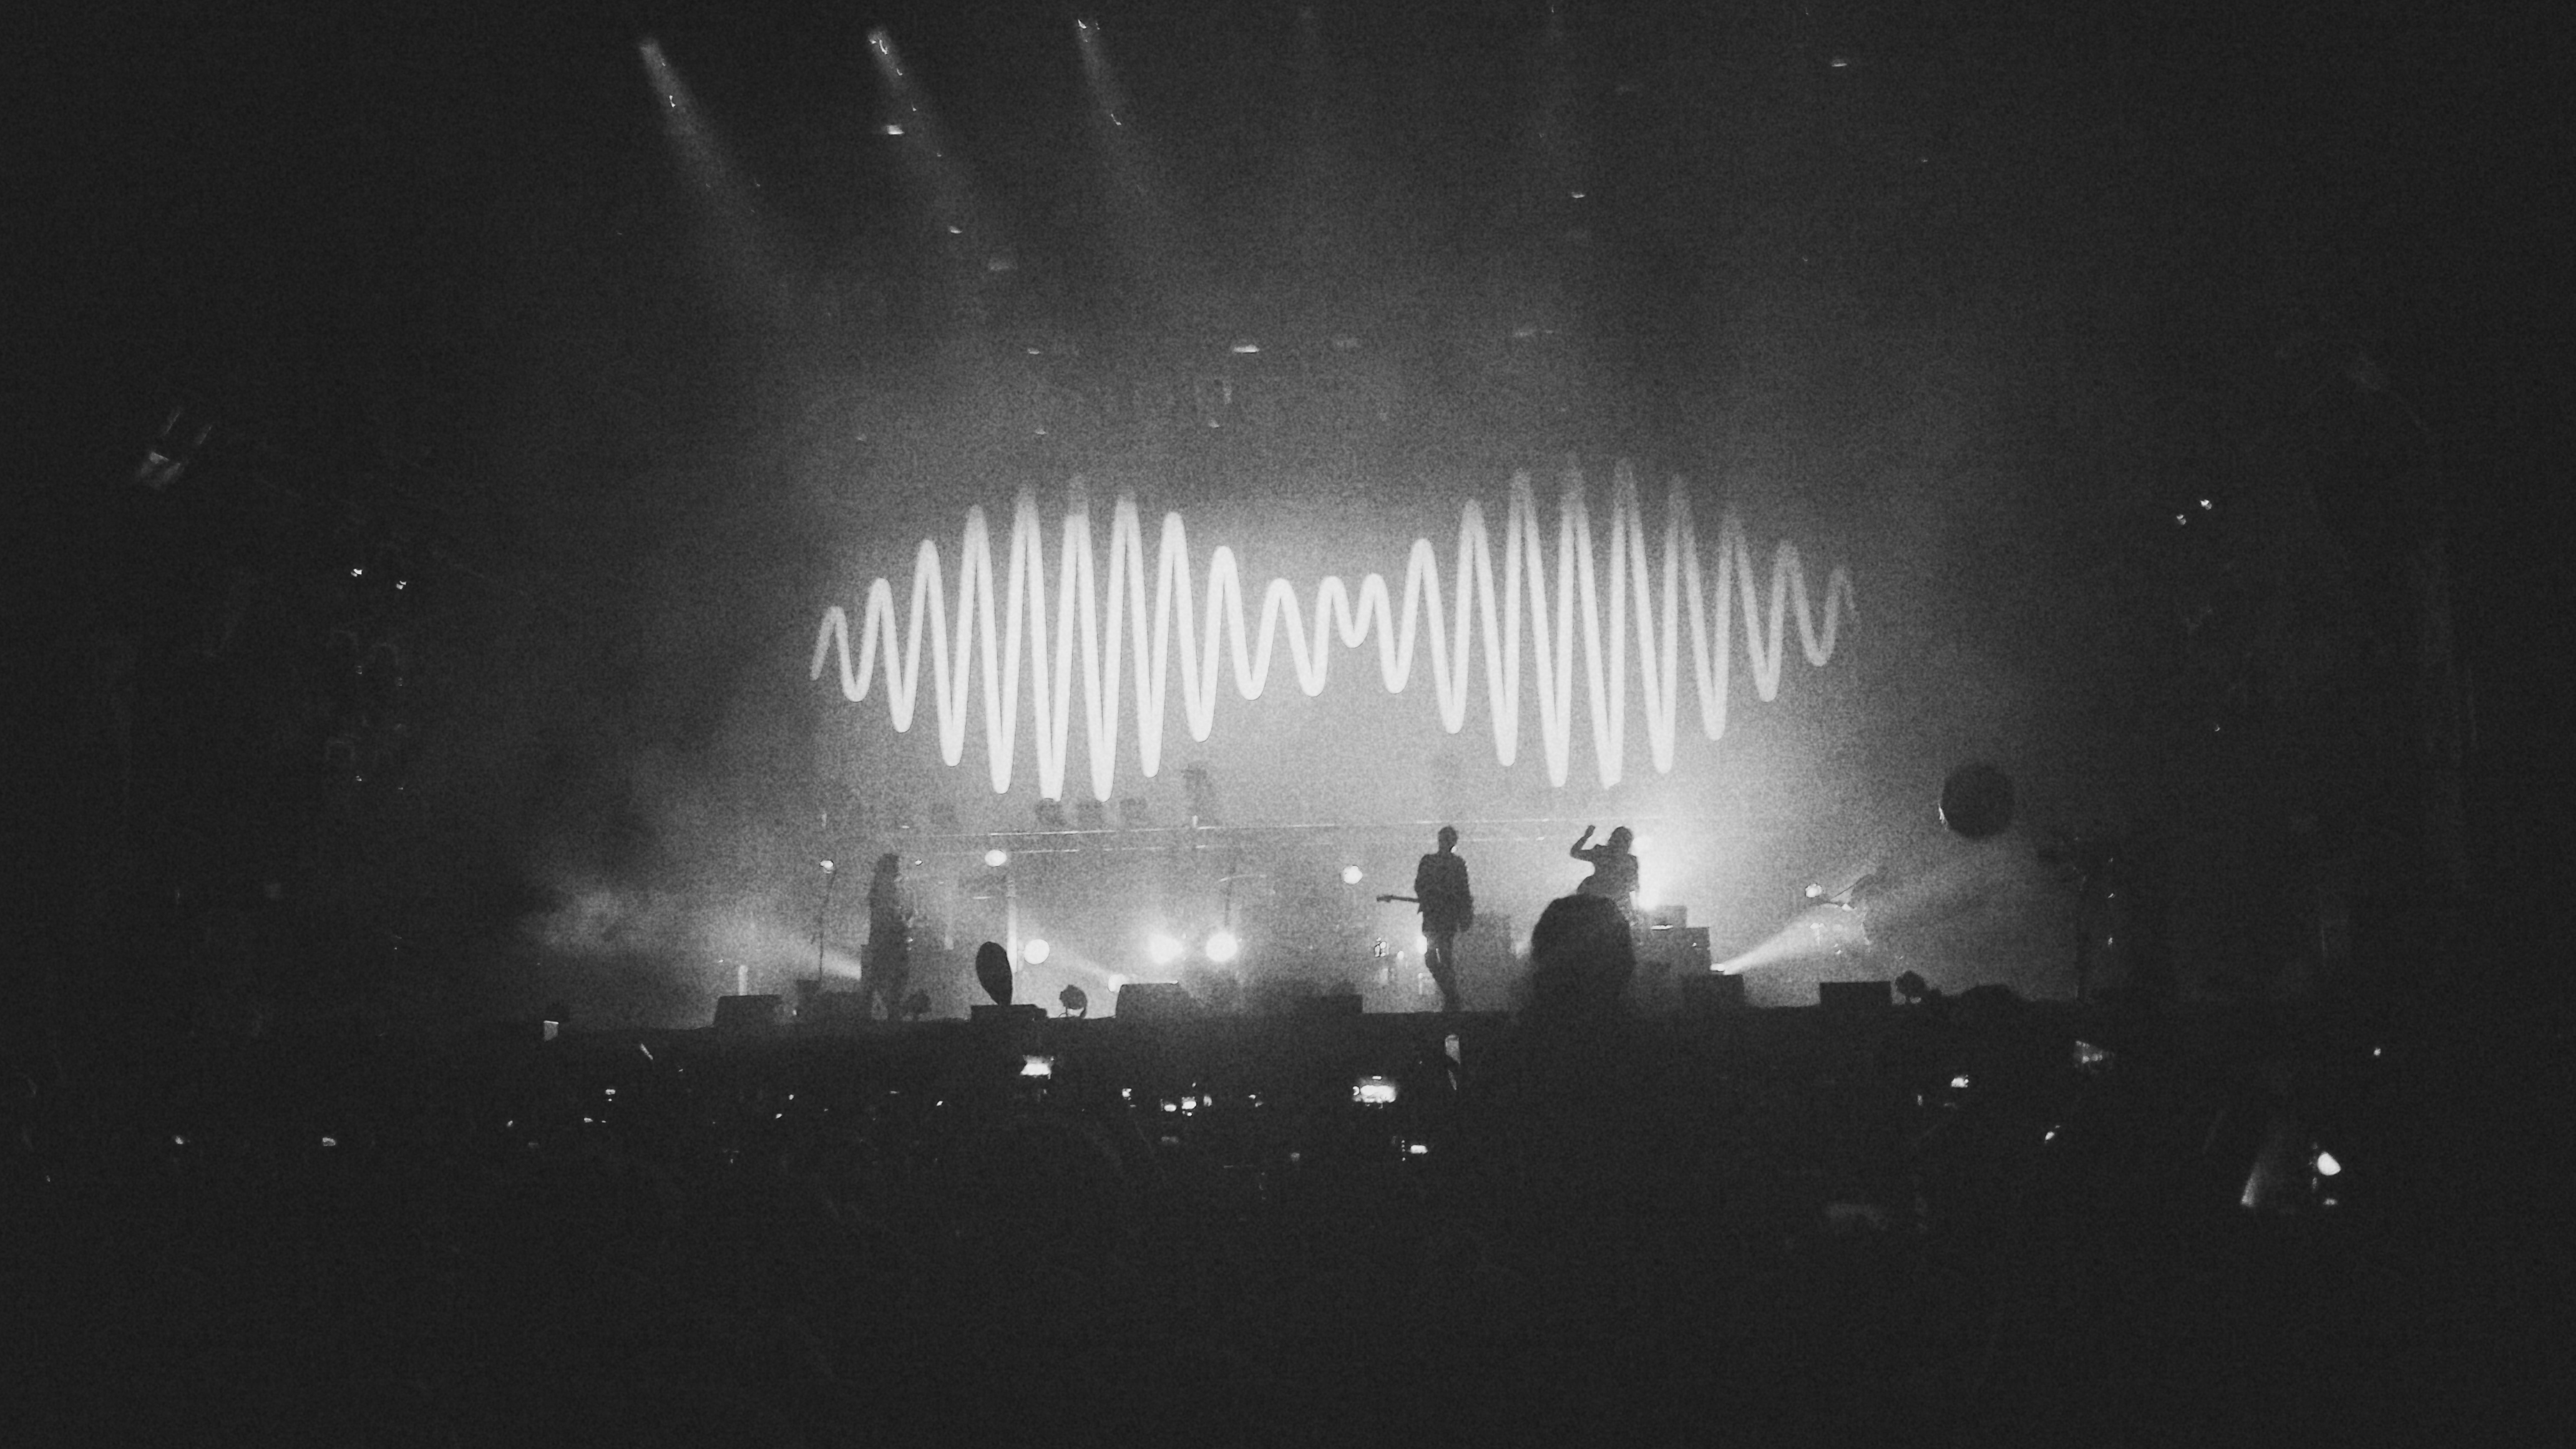 Took a picture of the band and stage during the Arctic Monkeys' set at Osheaga.